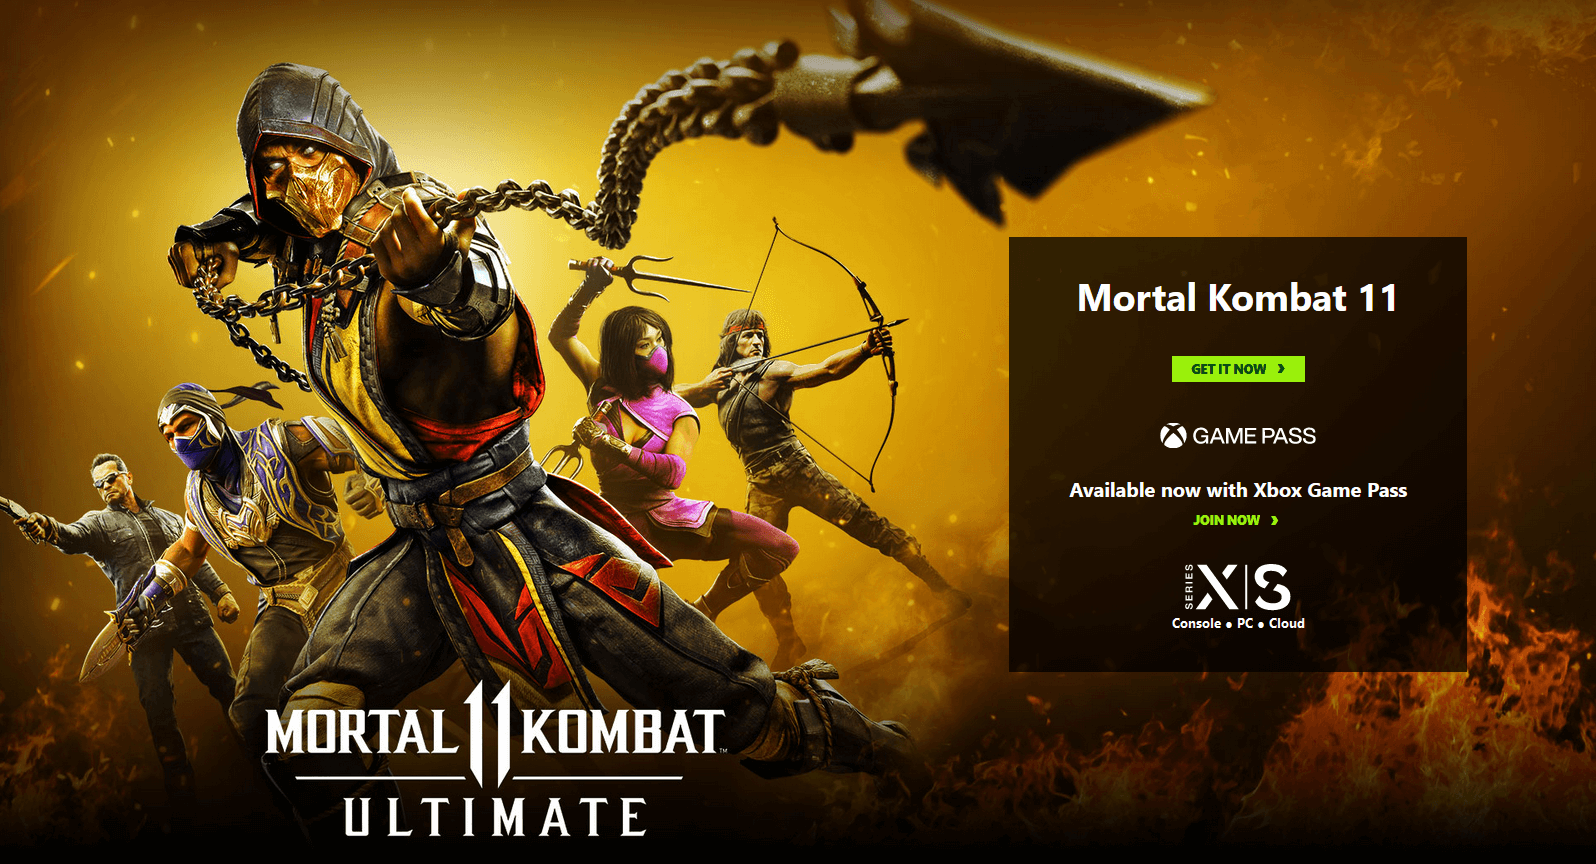 MK11 is on Game Pass